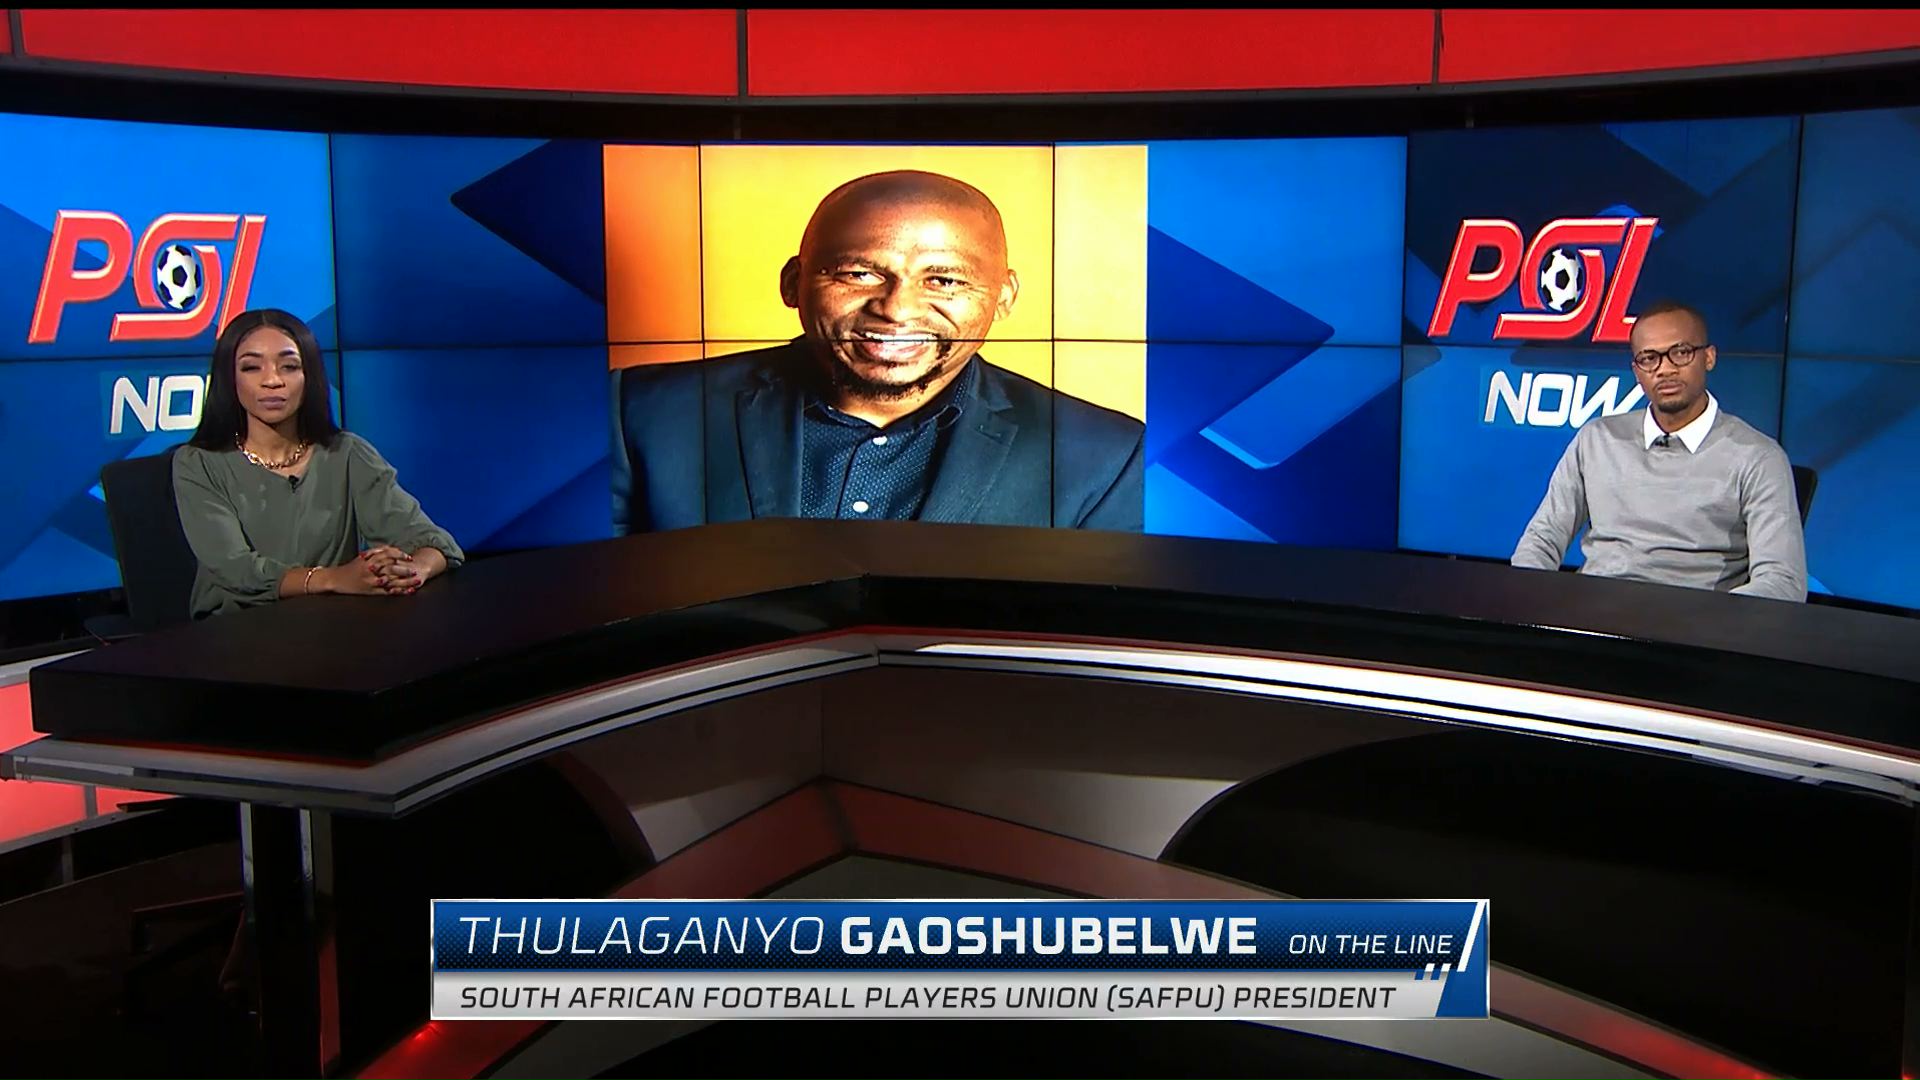 PSL Now | Episode 115 | Interview with Brighton Mhlongo and Thulaganyo Gaoshubelwe